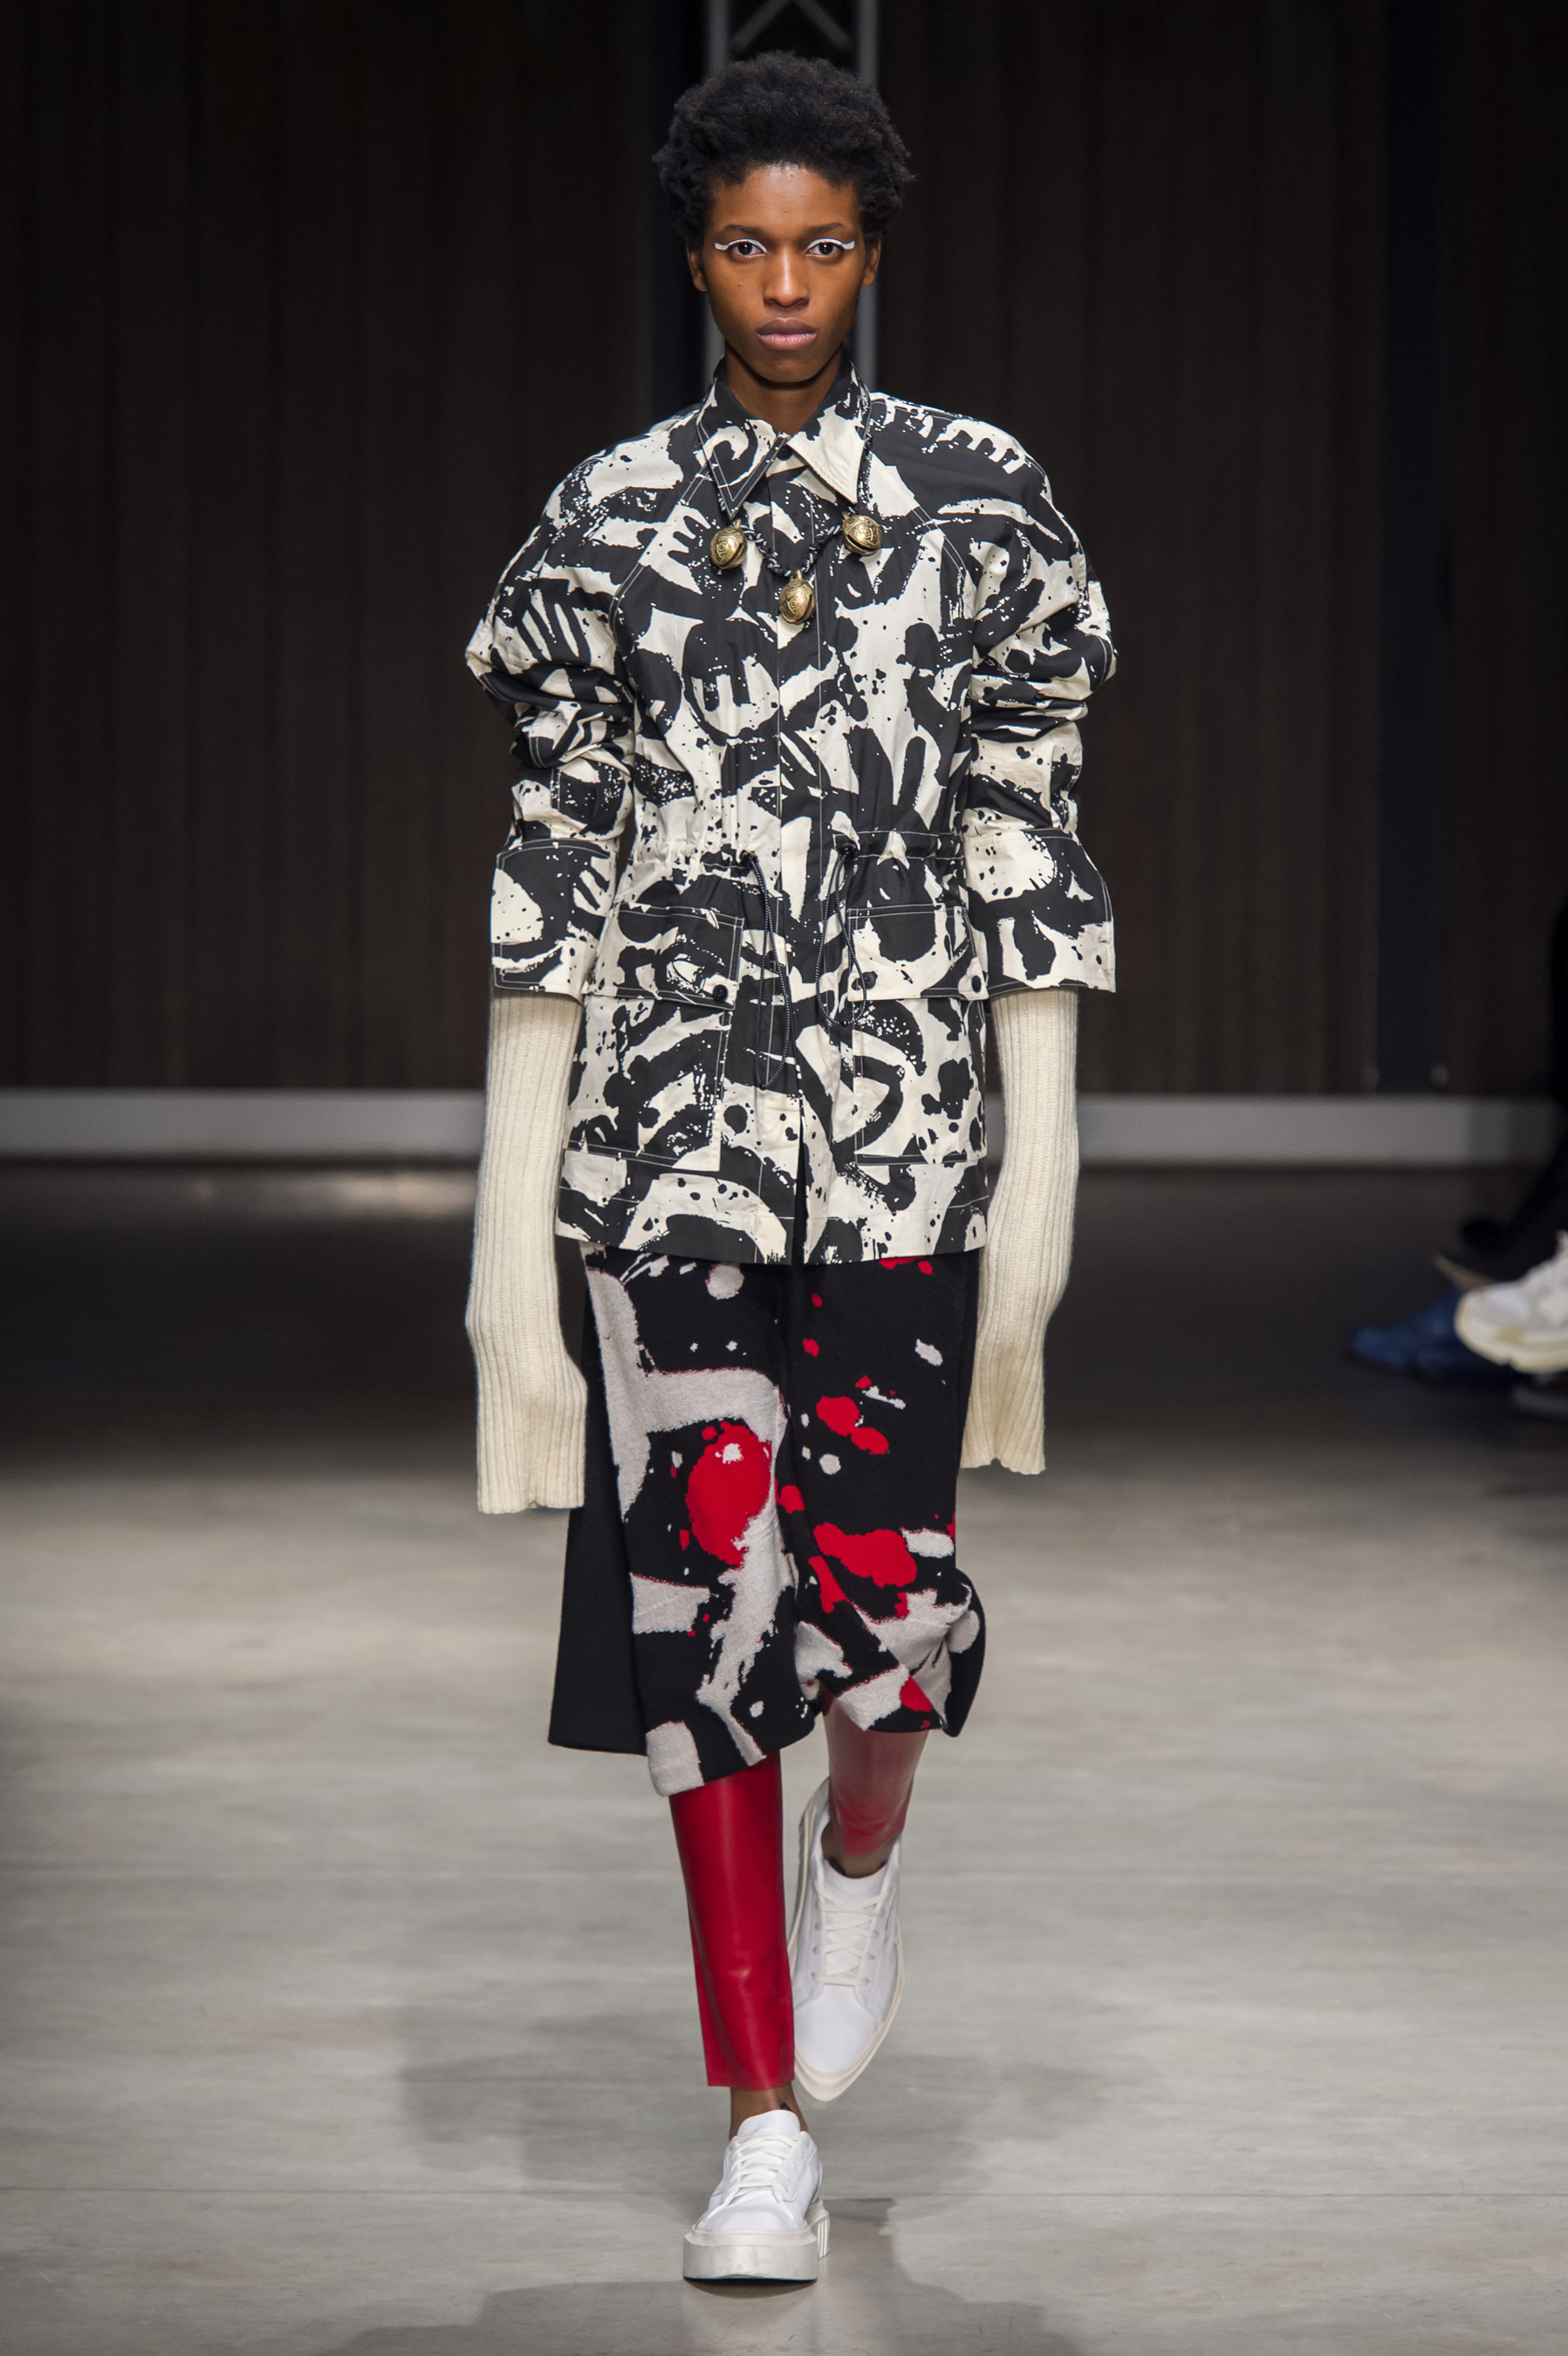 Milan Top 10 'Other' Fall 2019 Fashion Shows | The Impression